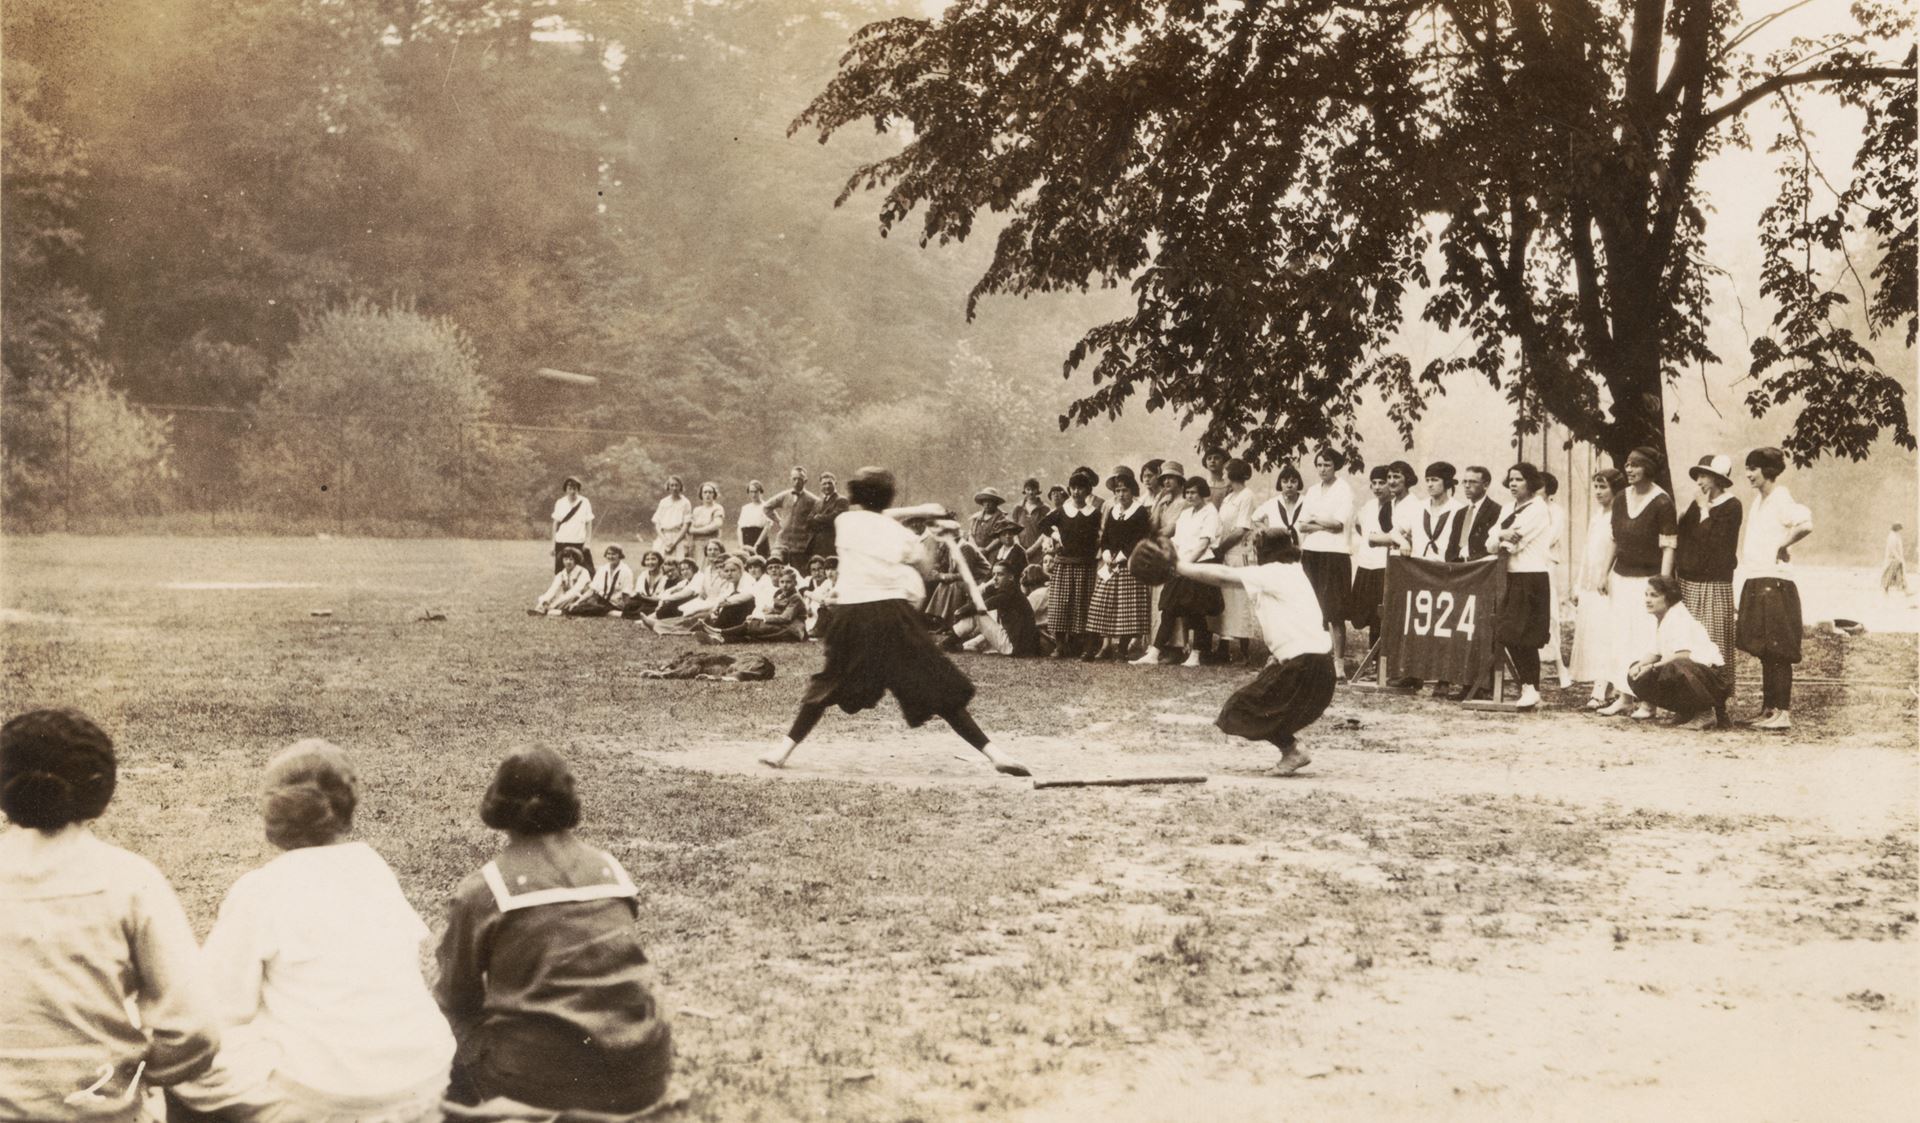 Image of a baseball game from 1924. The batter is about to hit an incoming ball, and a crowd is watching holding a sign reading 1924.